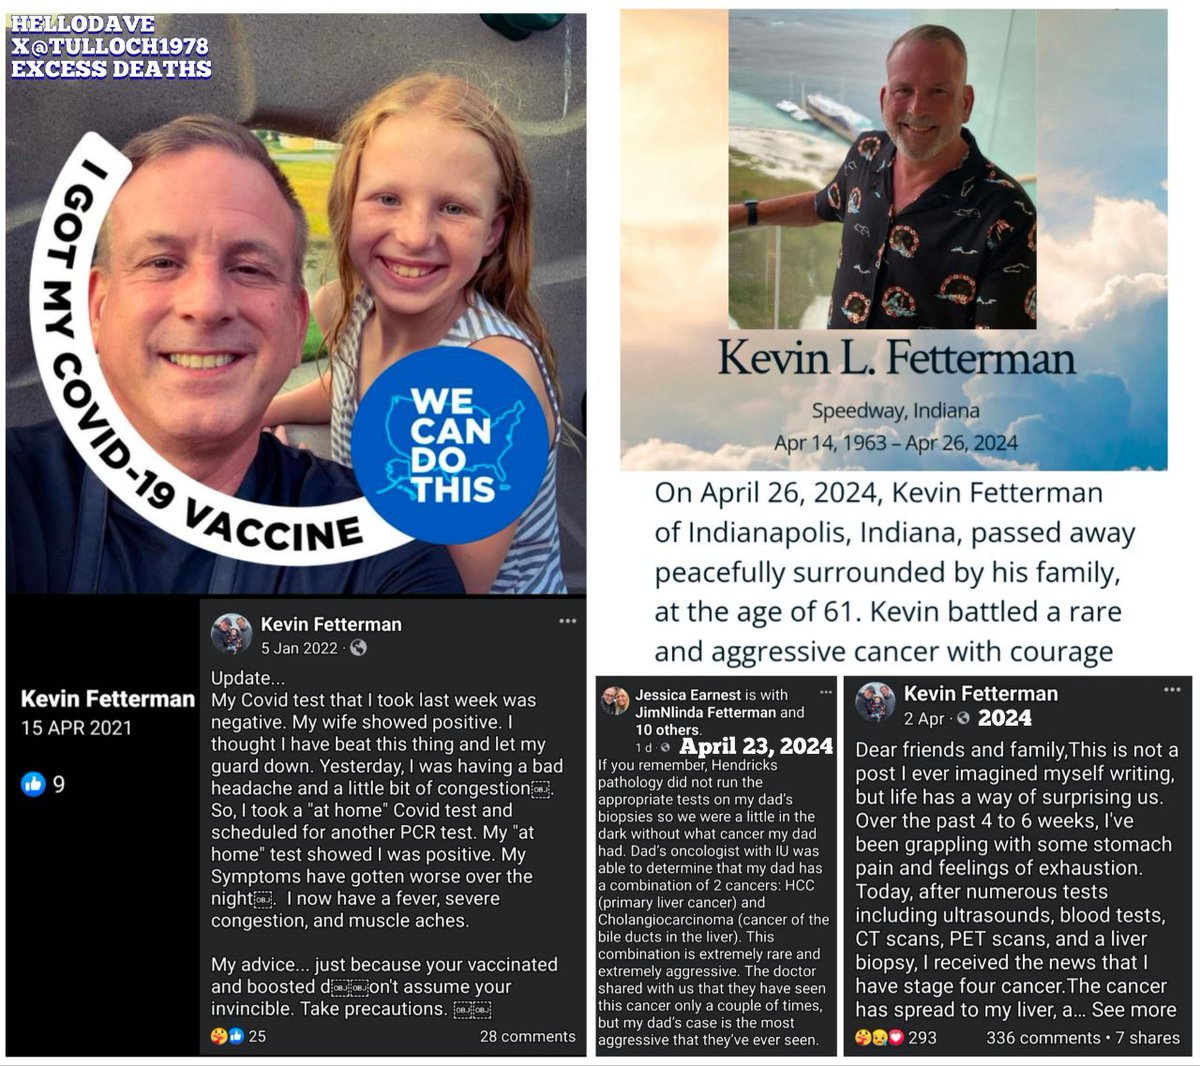 Indiana: Kevin Fetterman, died within weeks of being diagnosed with a combination of extremely rare & aggressive liver cancer. HCC & Cholangiocarcinoma.

'The doctor said it's the most aggressive case they’ve ever seen.' 

#diedsuddenly April 2024 #Pfizer

legacy.com/obituaries/nam…